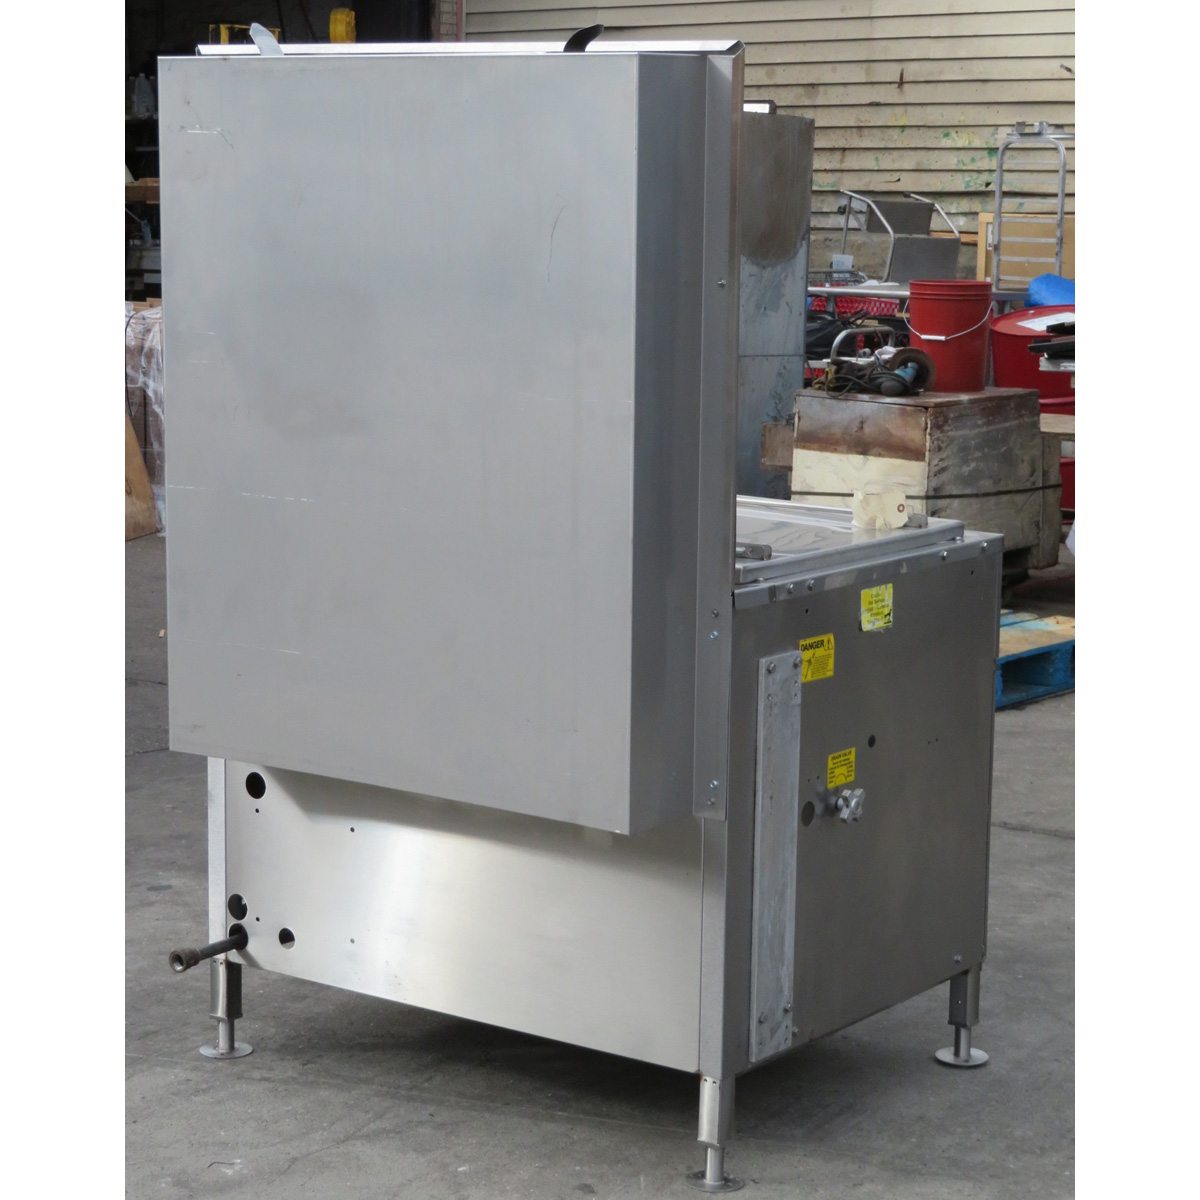 Belshaw Adamatic 734CG Natural Gas Donut Fryer, Used Very Good Condition image 2